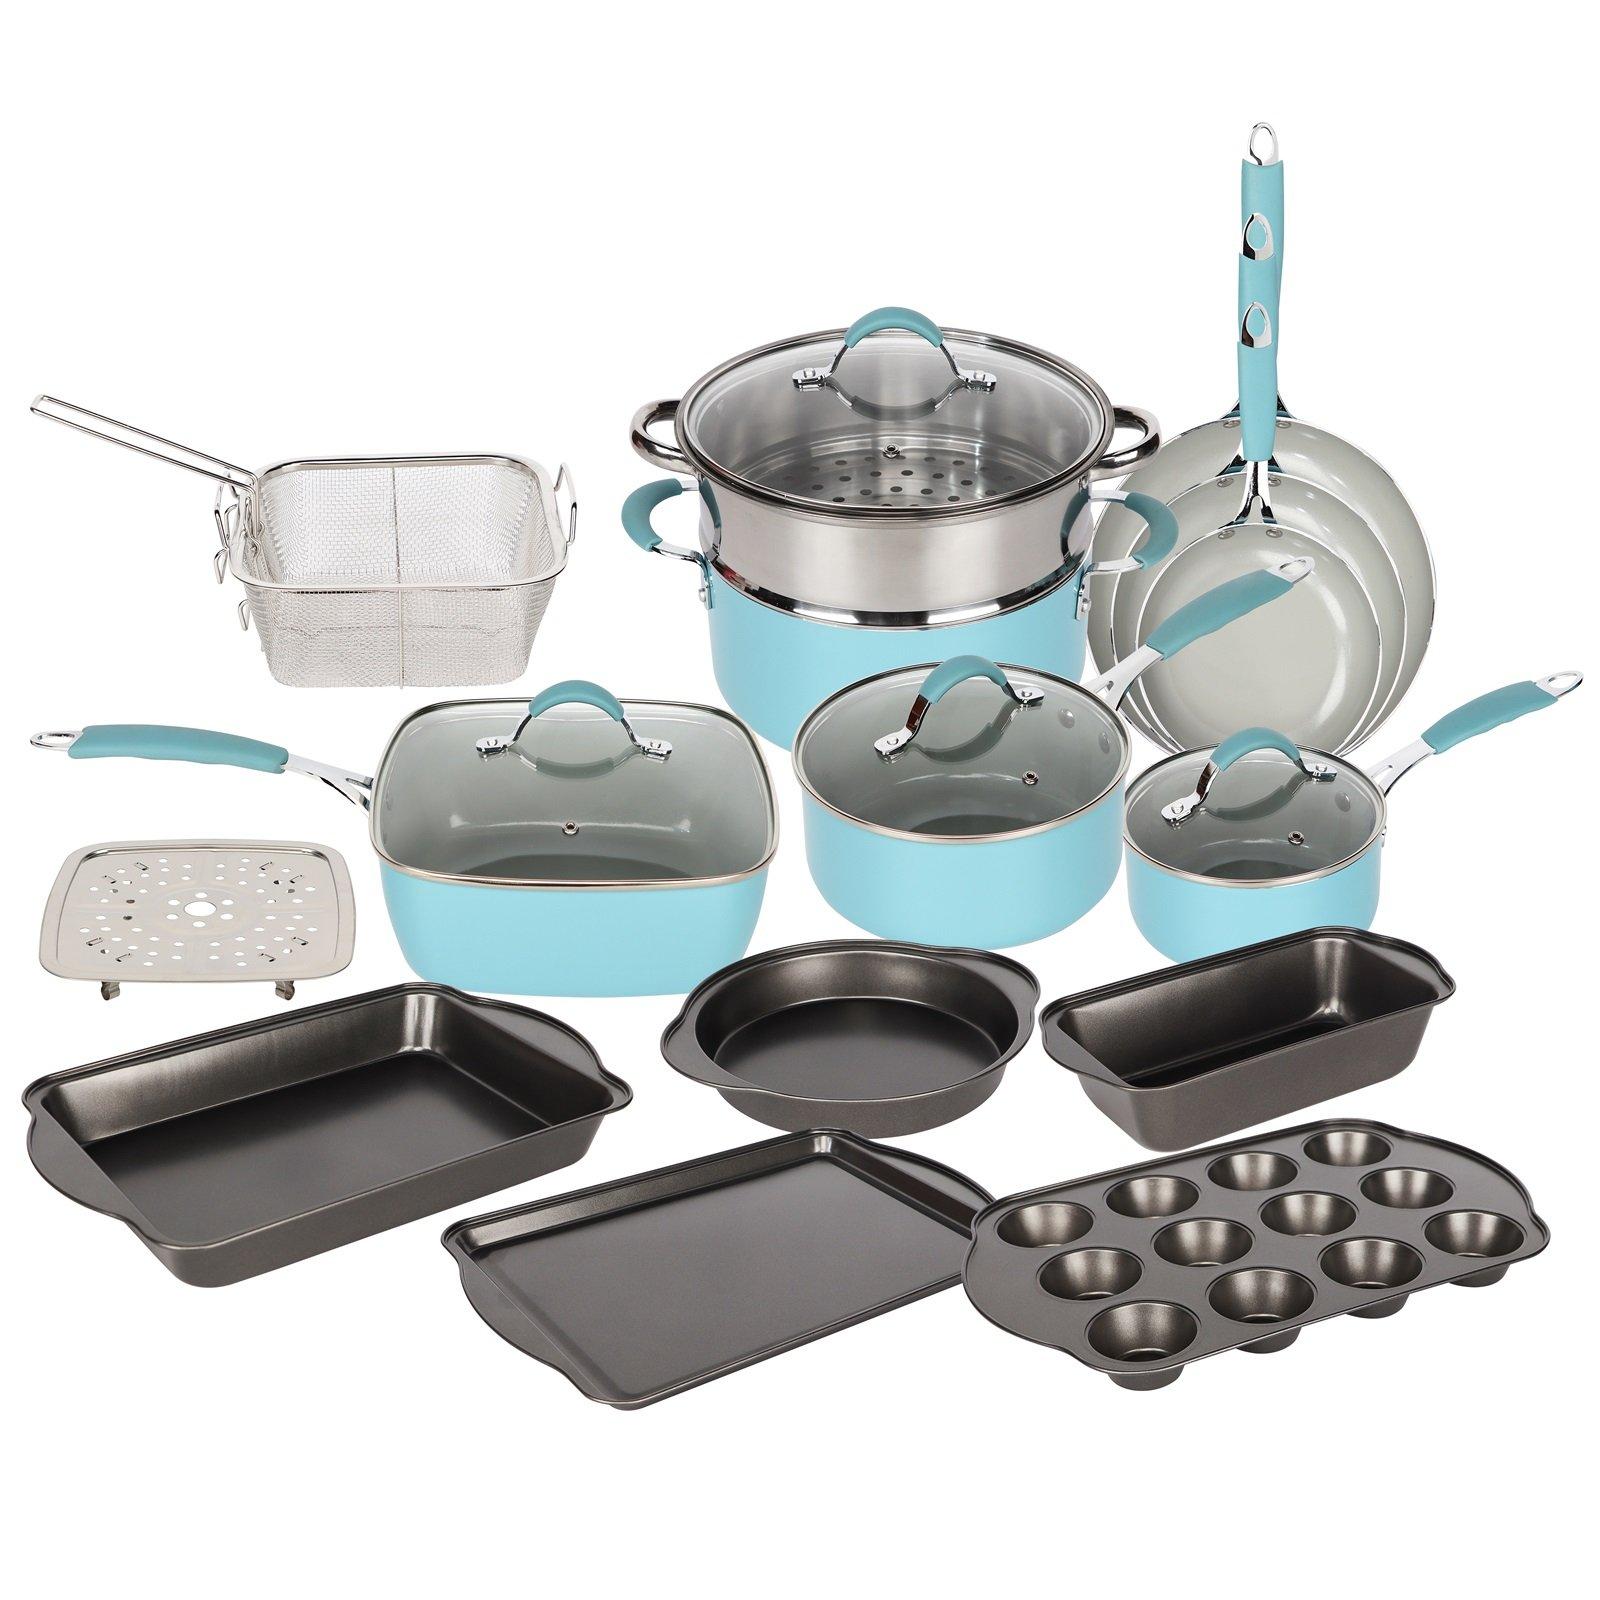 Blue and Dove Grey Induction 19 Piece Non Stick Kitchen Cookware Bakeware Set